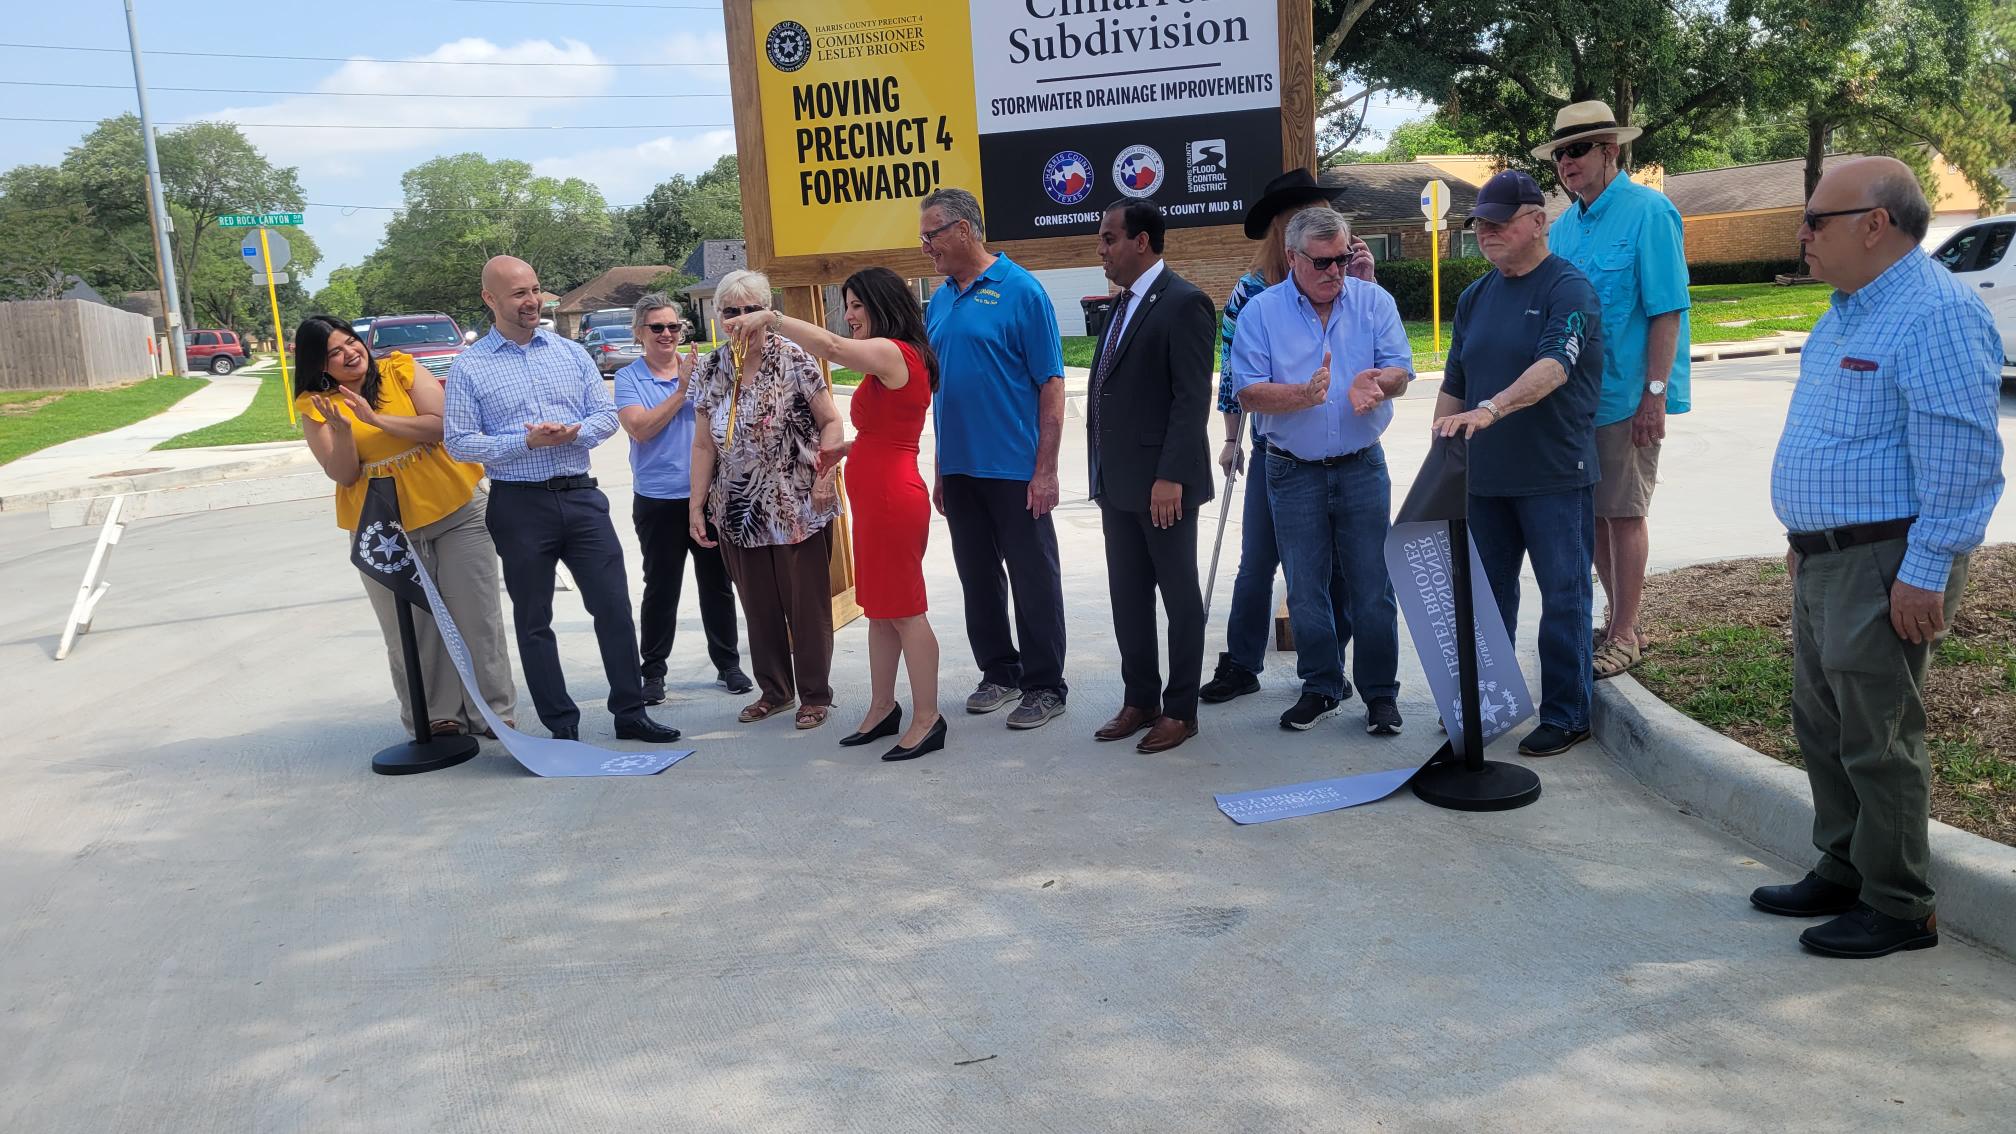 Harris County Precinct 4 hosted a ribbon-cutting ceremony to celebrate a completed drainage project in the Cimarron neighborhood.